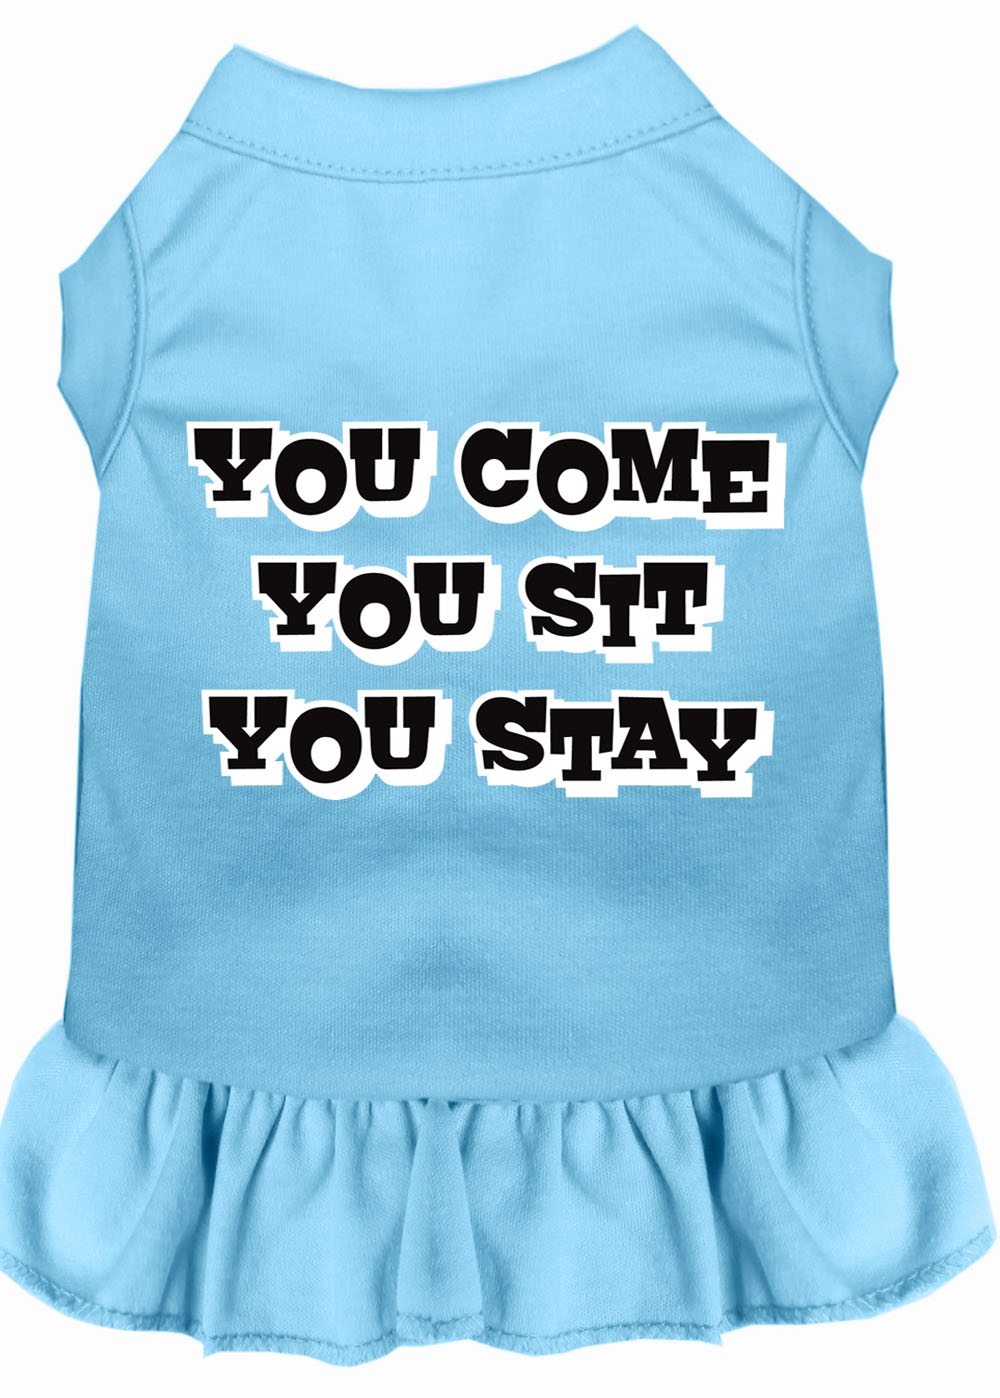 You Come, You Sit, You Stay Screen Print Dress Baby Blue Xs GreatEagleInc